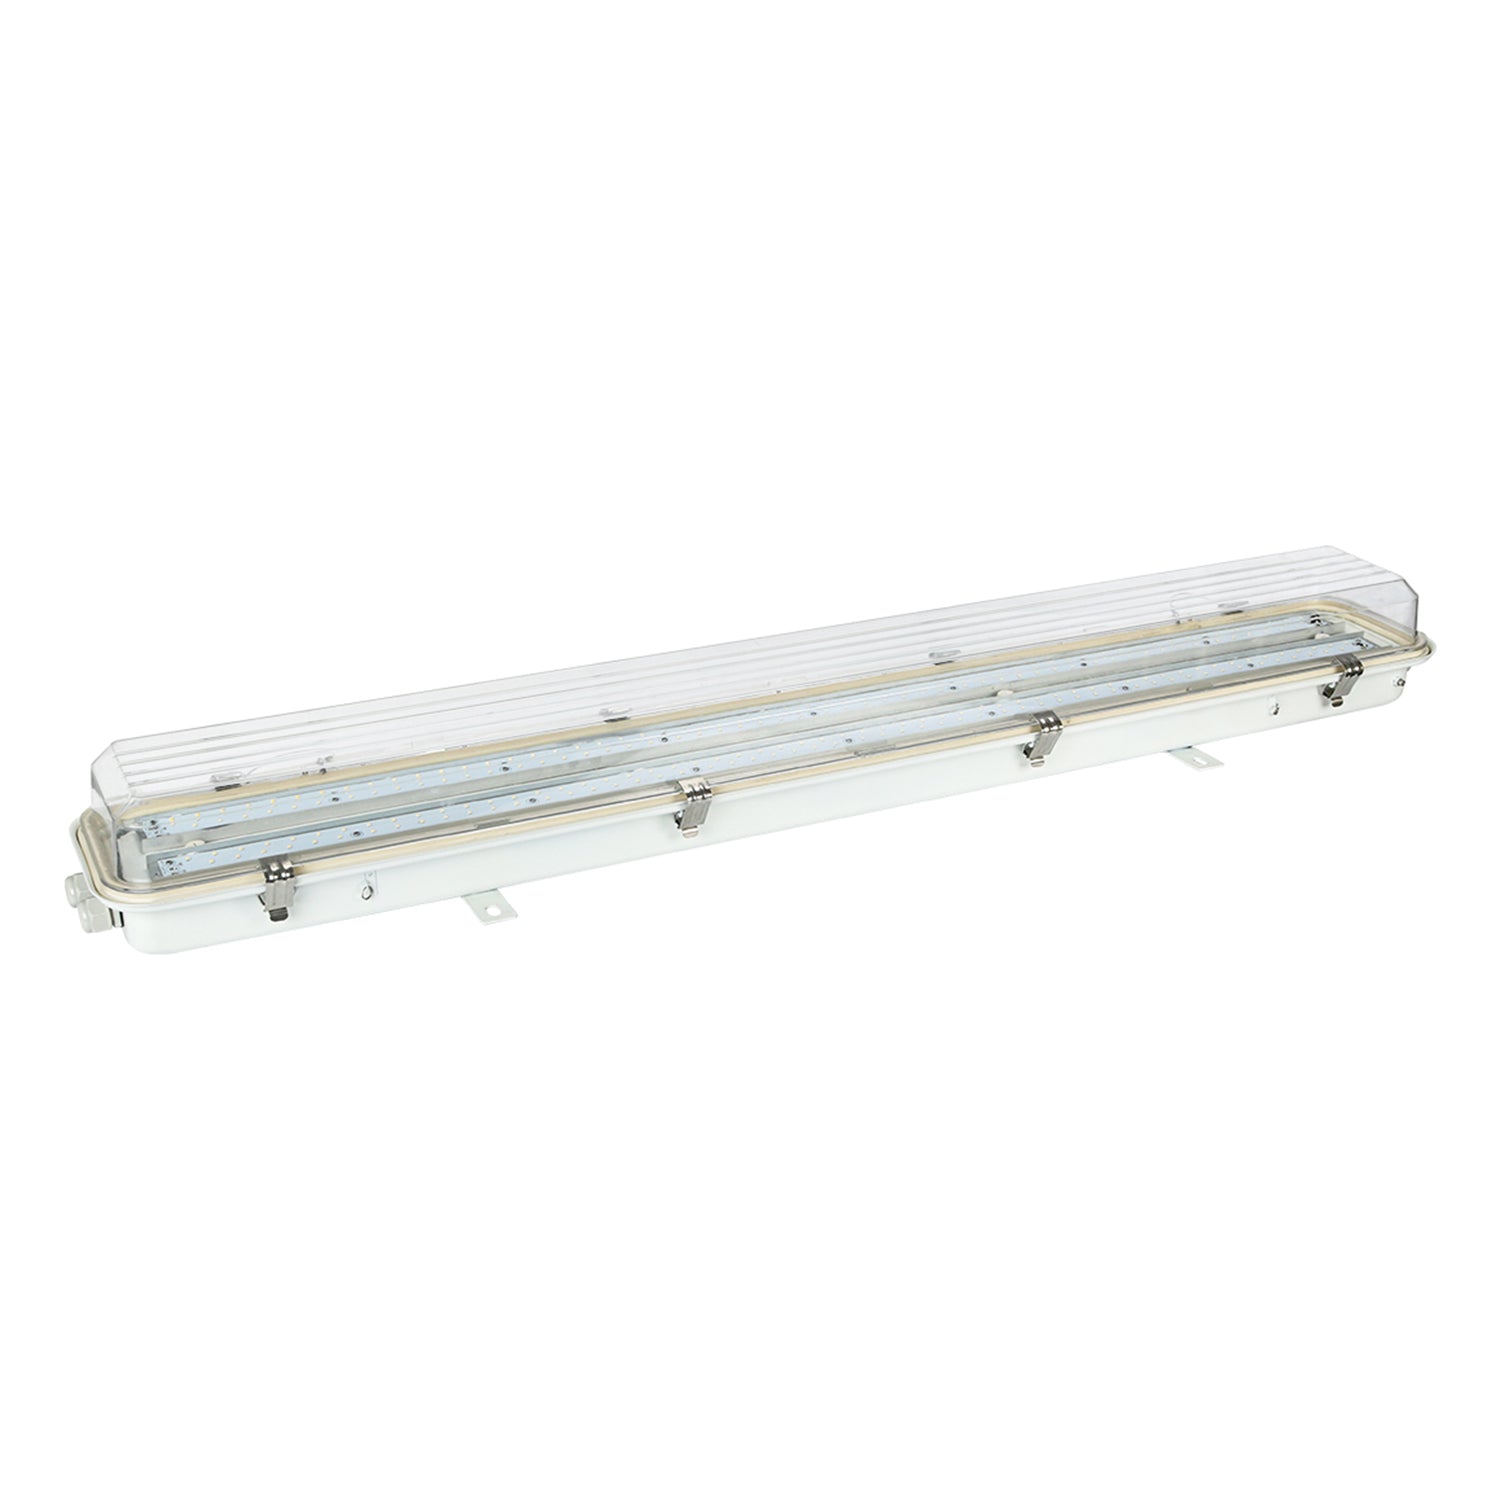 4FT LED Explosion Proof Low Bay Linear Light - 50W - 5000K Daylight, 7024LM, 0-10V Dimming, IP66 Rated, Hazardous Location Lighting Fixtures